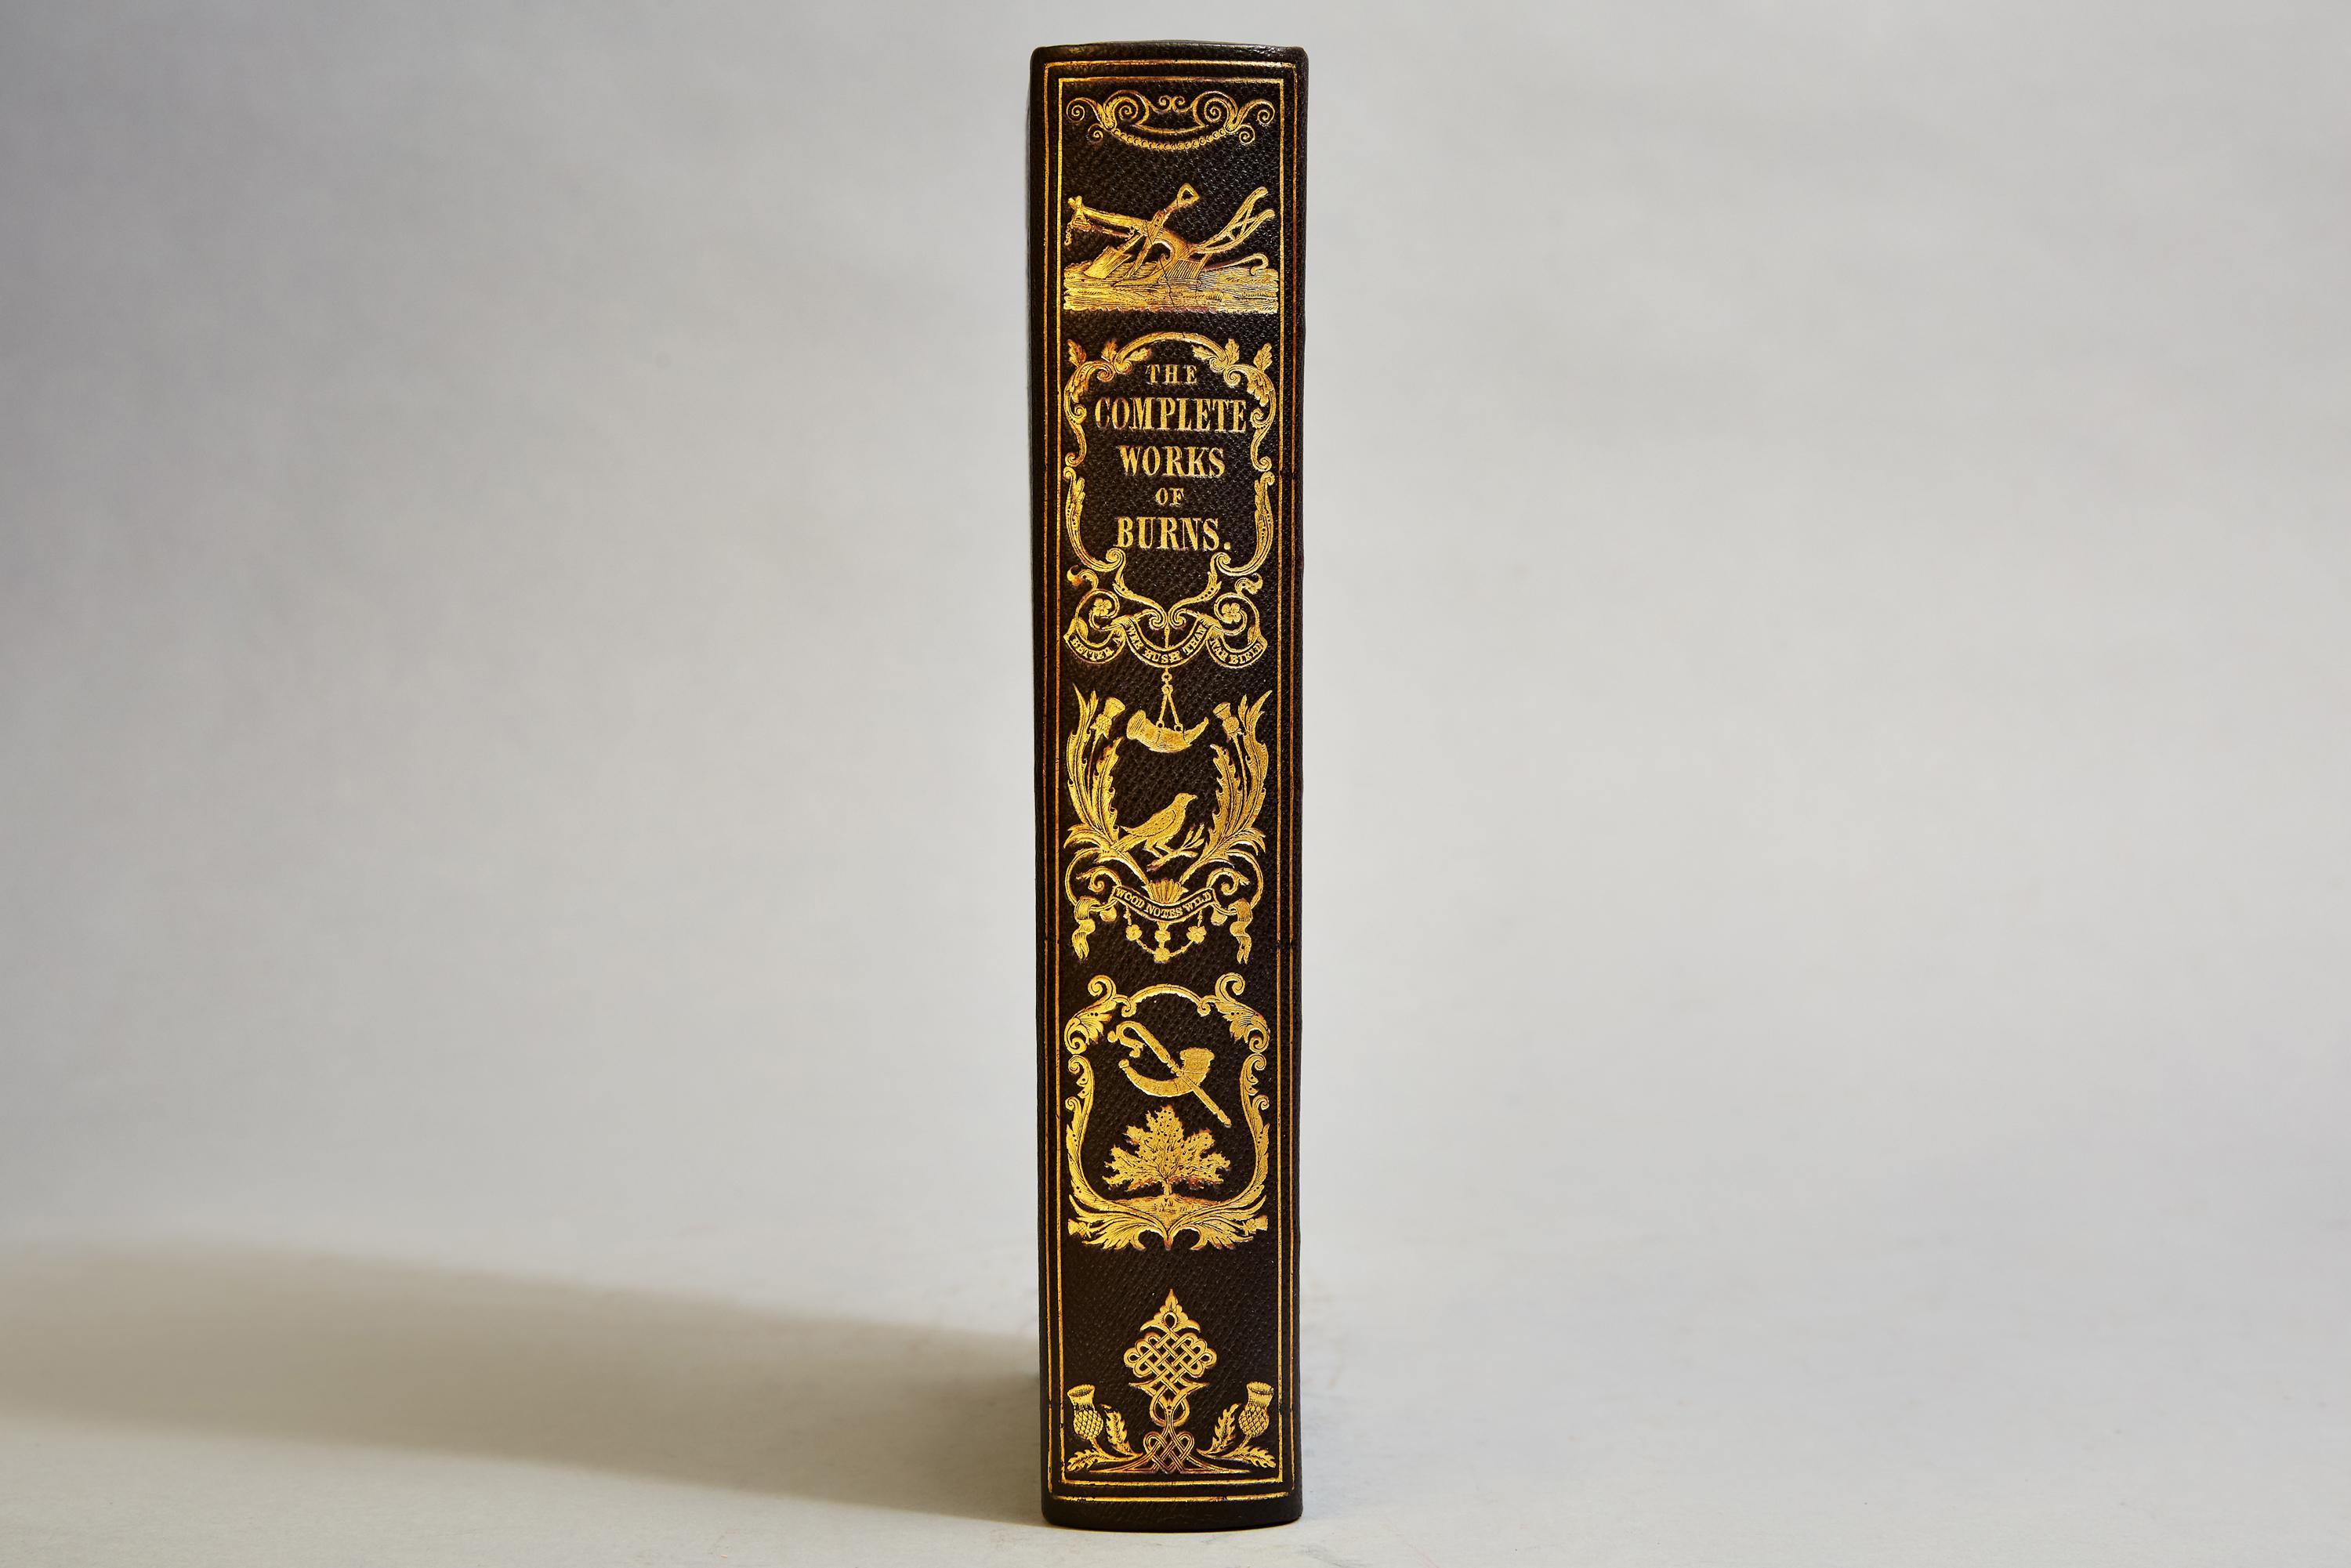 The Complete Works of Robert Burns. Containing his poems, songs, and correspondence

Binding is in fine condition, minor foxing to the plates, else a clean, tight copy.

Robert Burns (1750-1796), also known familiarly as Rabbie Burns, the